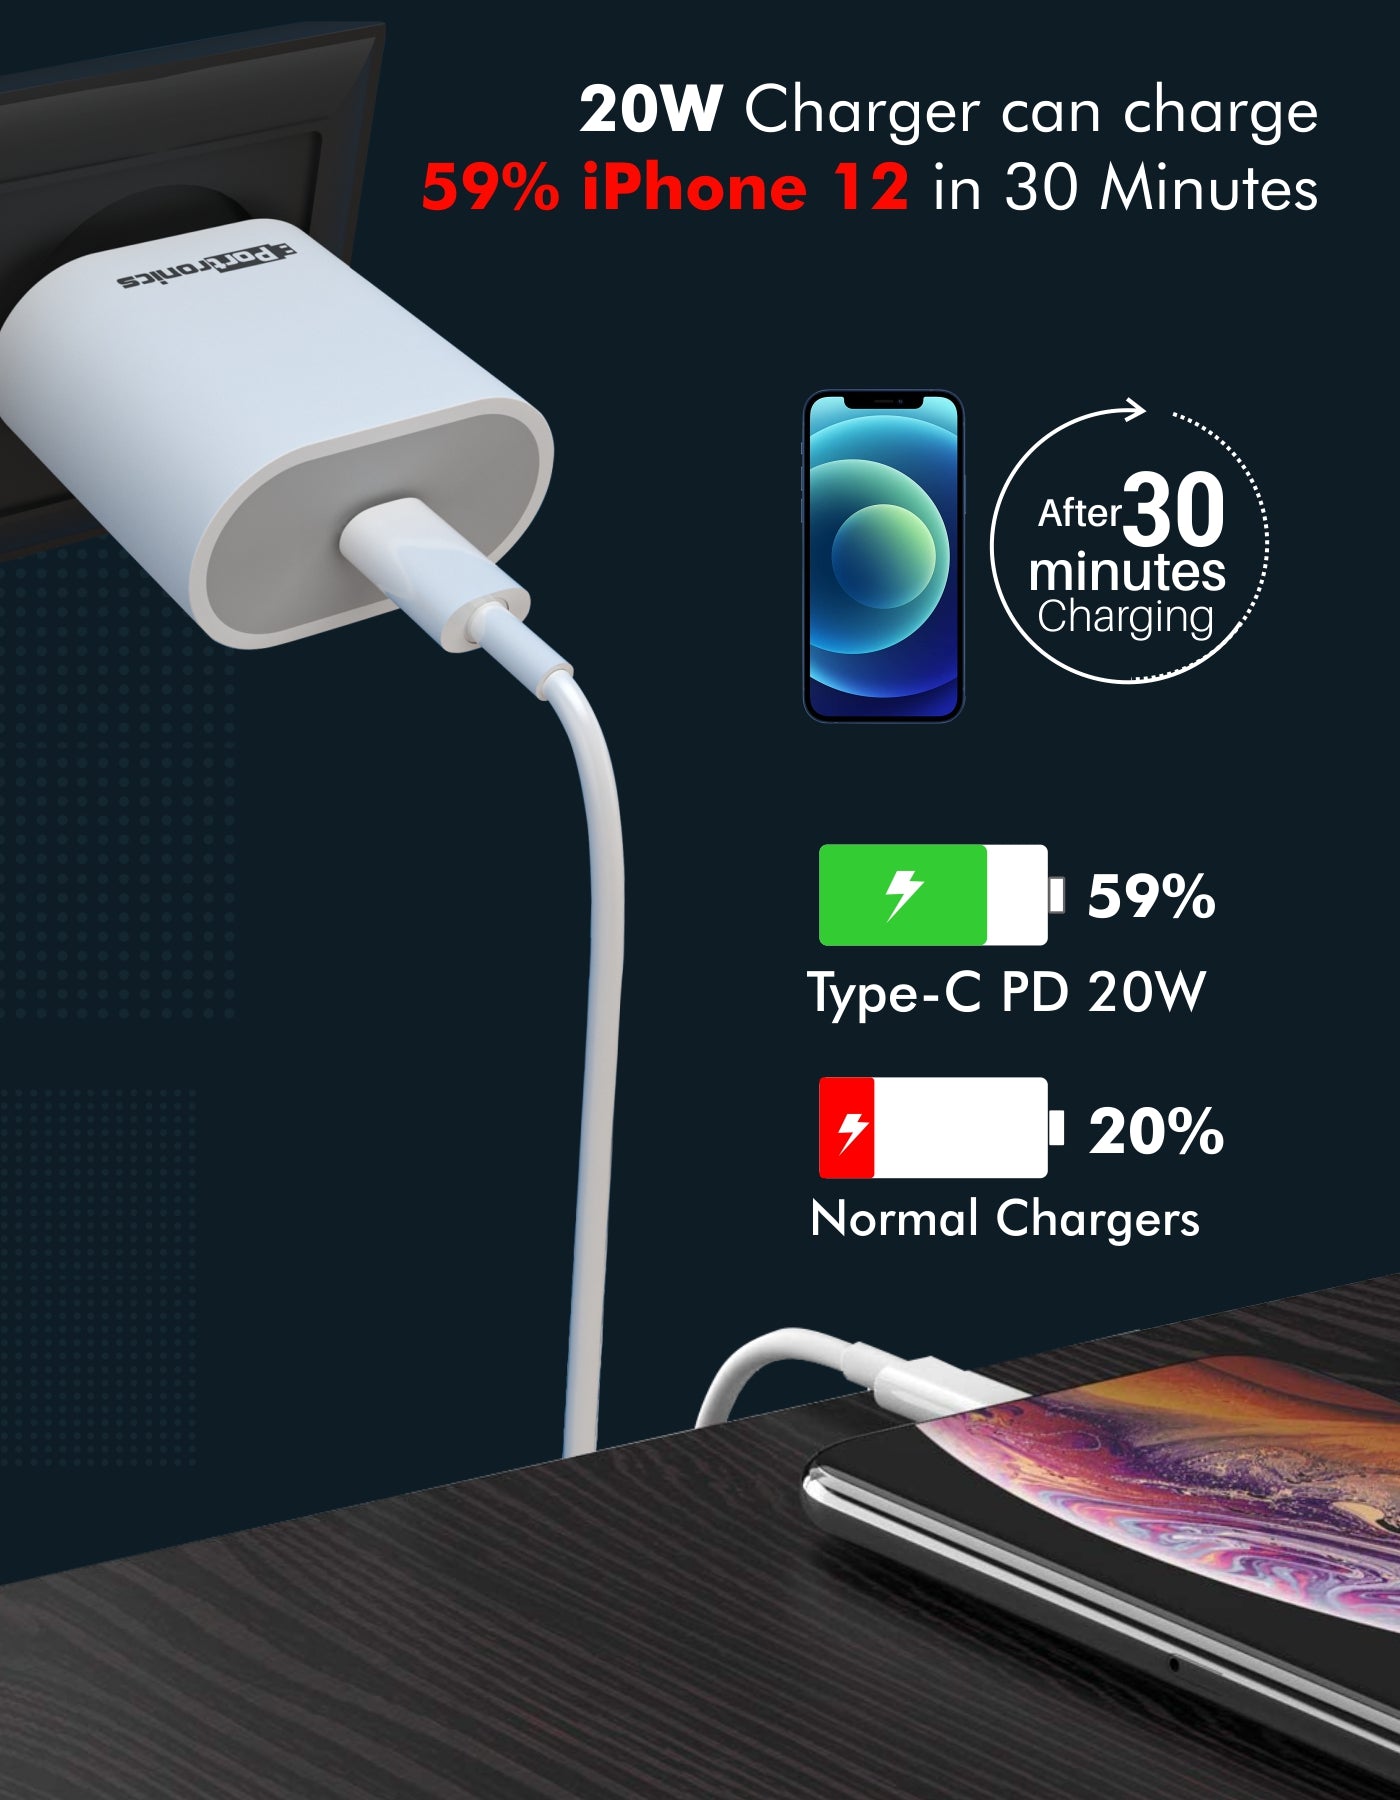 Adapto 20 - 20W Type-C PD Charger/Adapter with Fast Charging